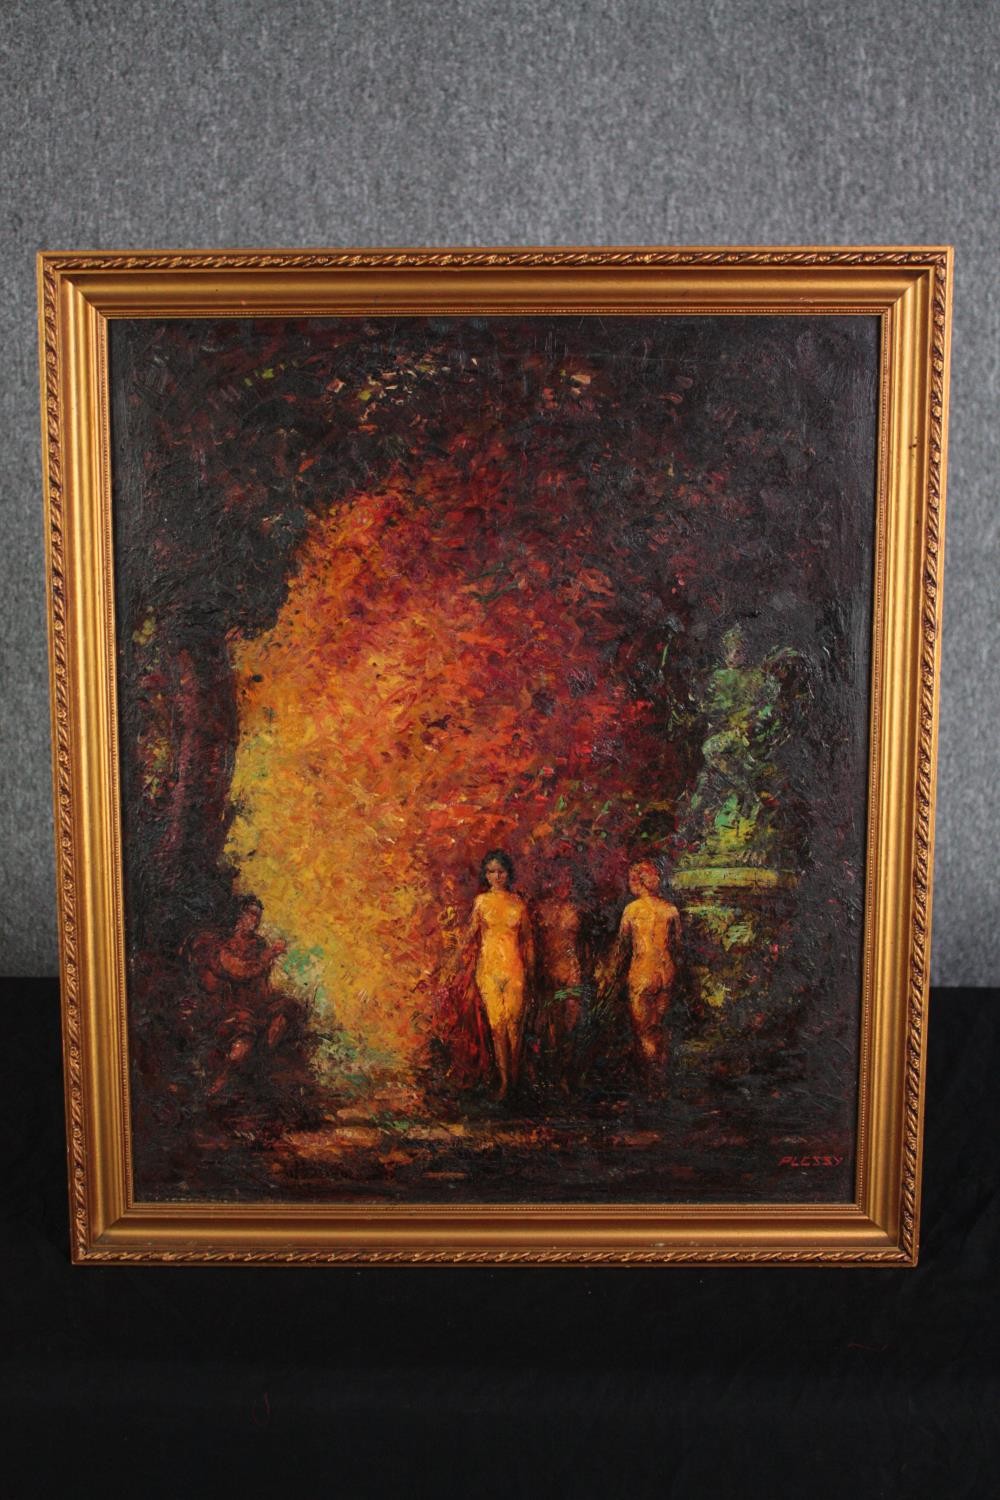 Oil painting on board. Female nudes. Signed 'Plessy' bottom right. Framed. H.61 W.53 cm. - Image 2 of 4